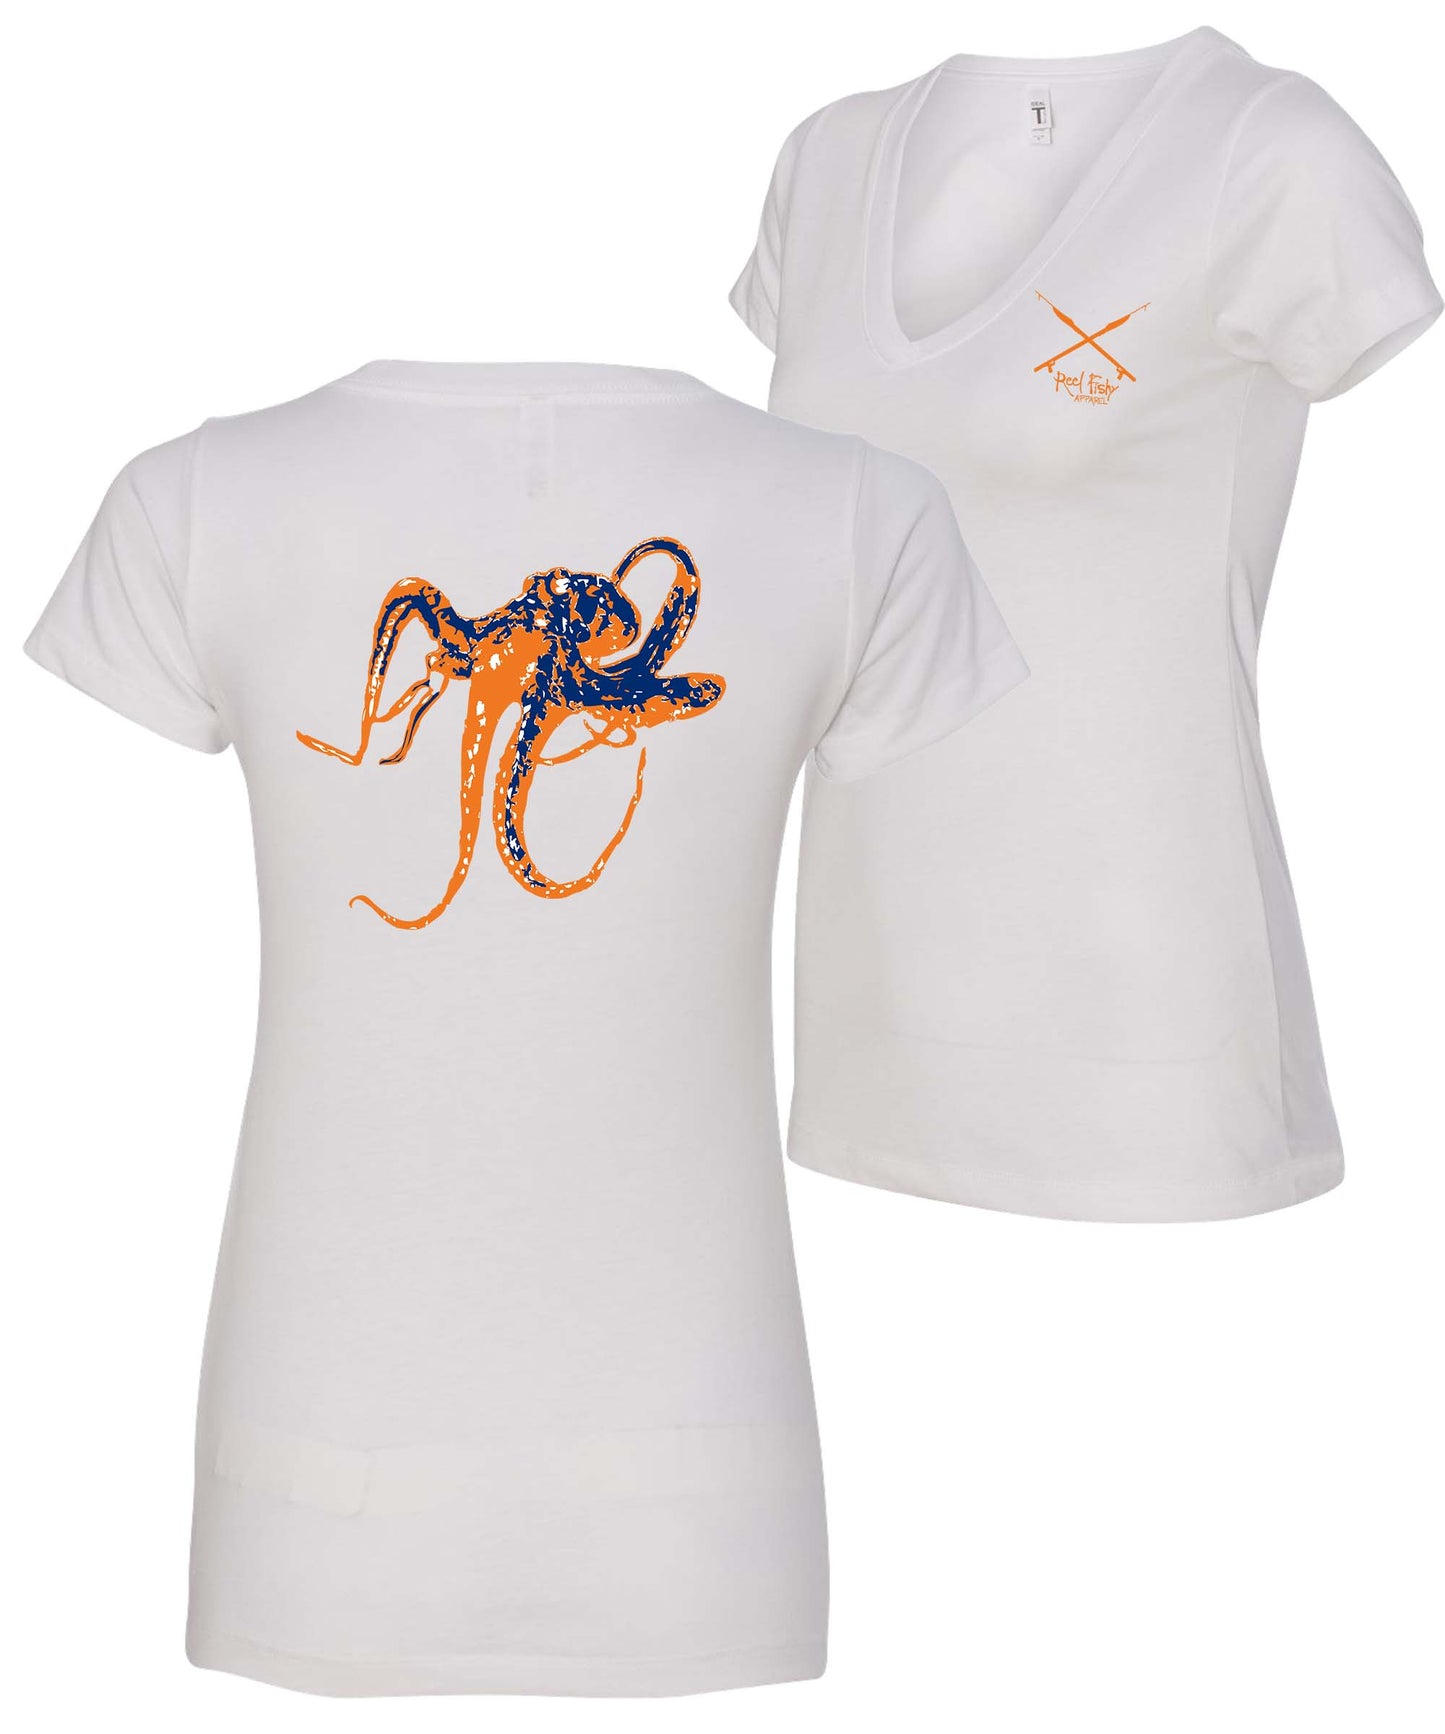 White Ladies Octopus V-neck Short Sleeve Cotton Tee - Reel Fishy Apparel Spearguns logo on front